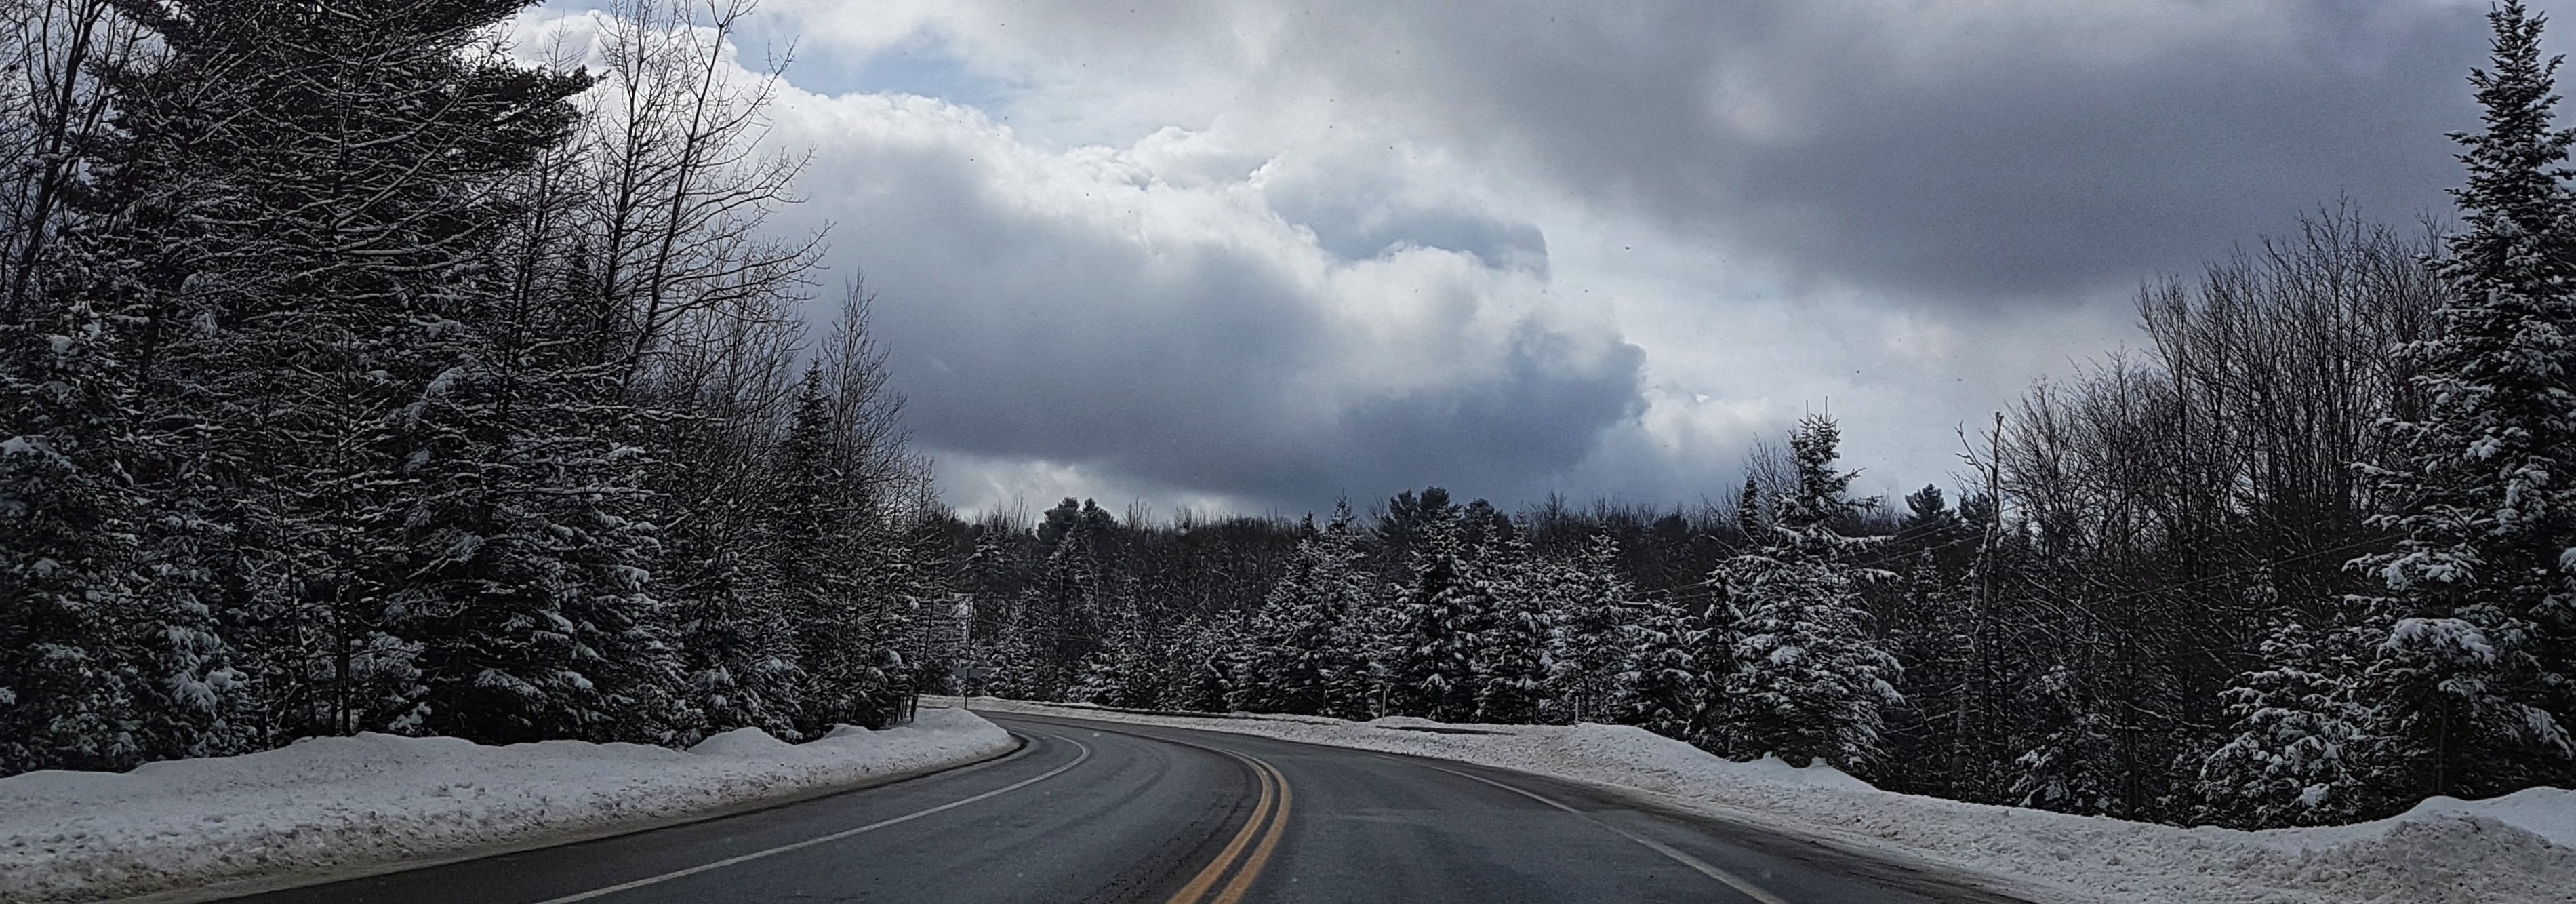 country road, winter road, open road